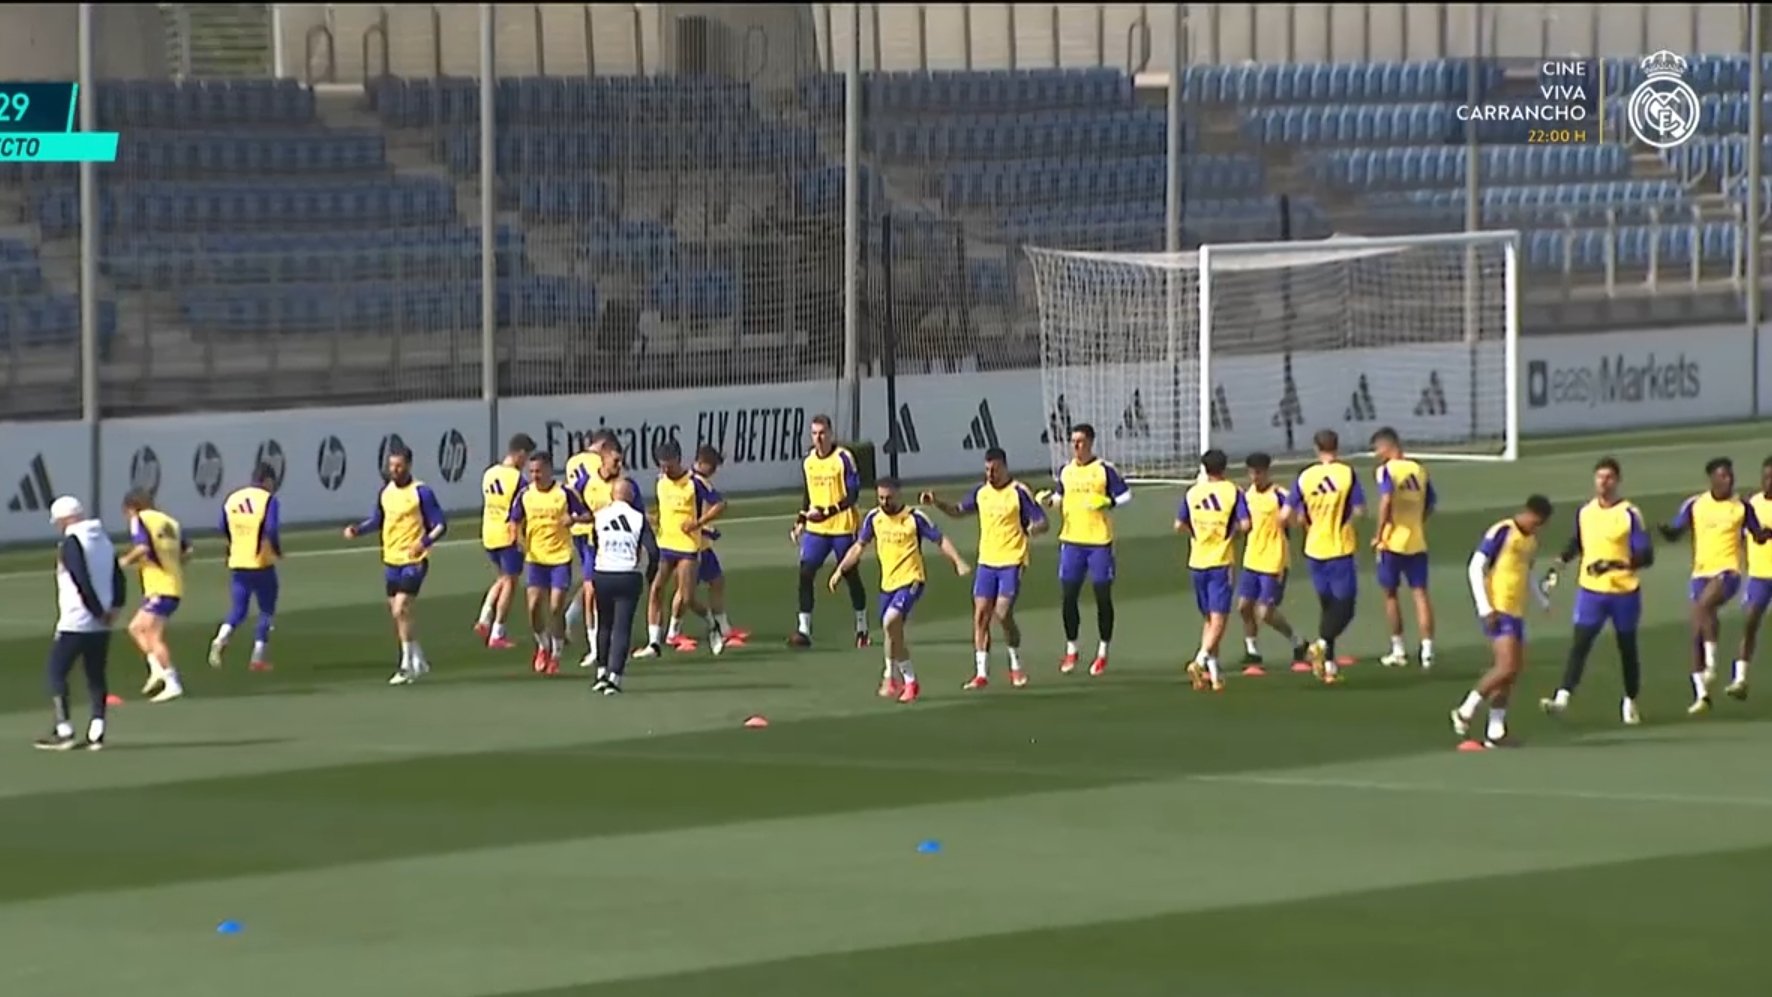 Real Madrid starter absent from training 24 hours before El Clasico – but another makes surprise return